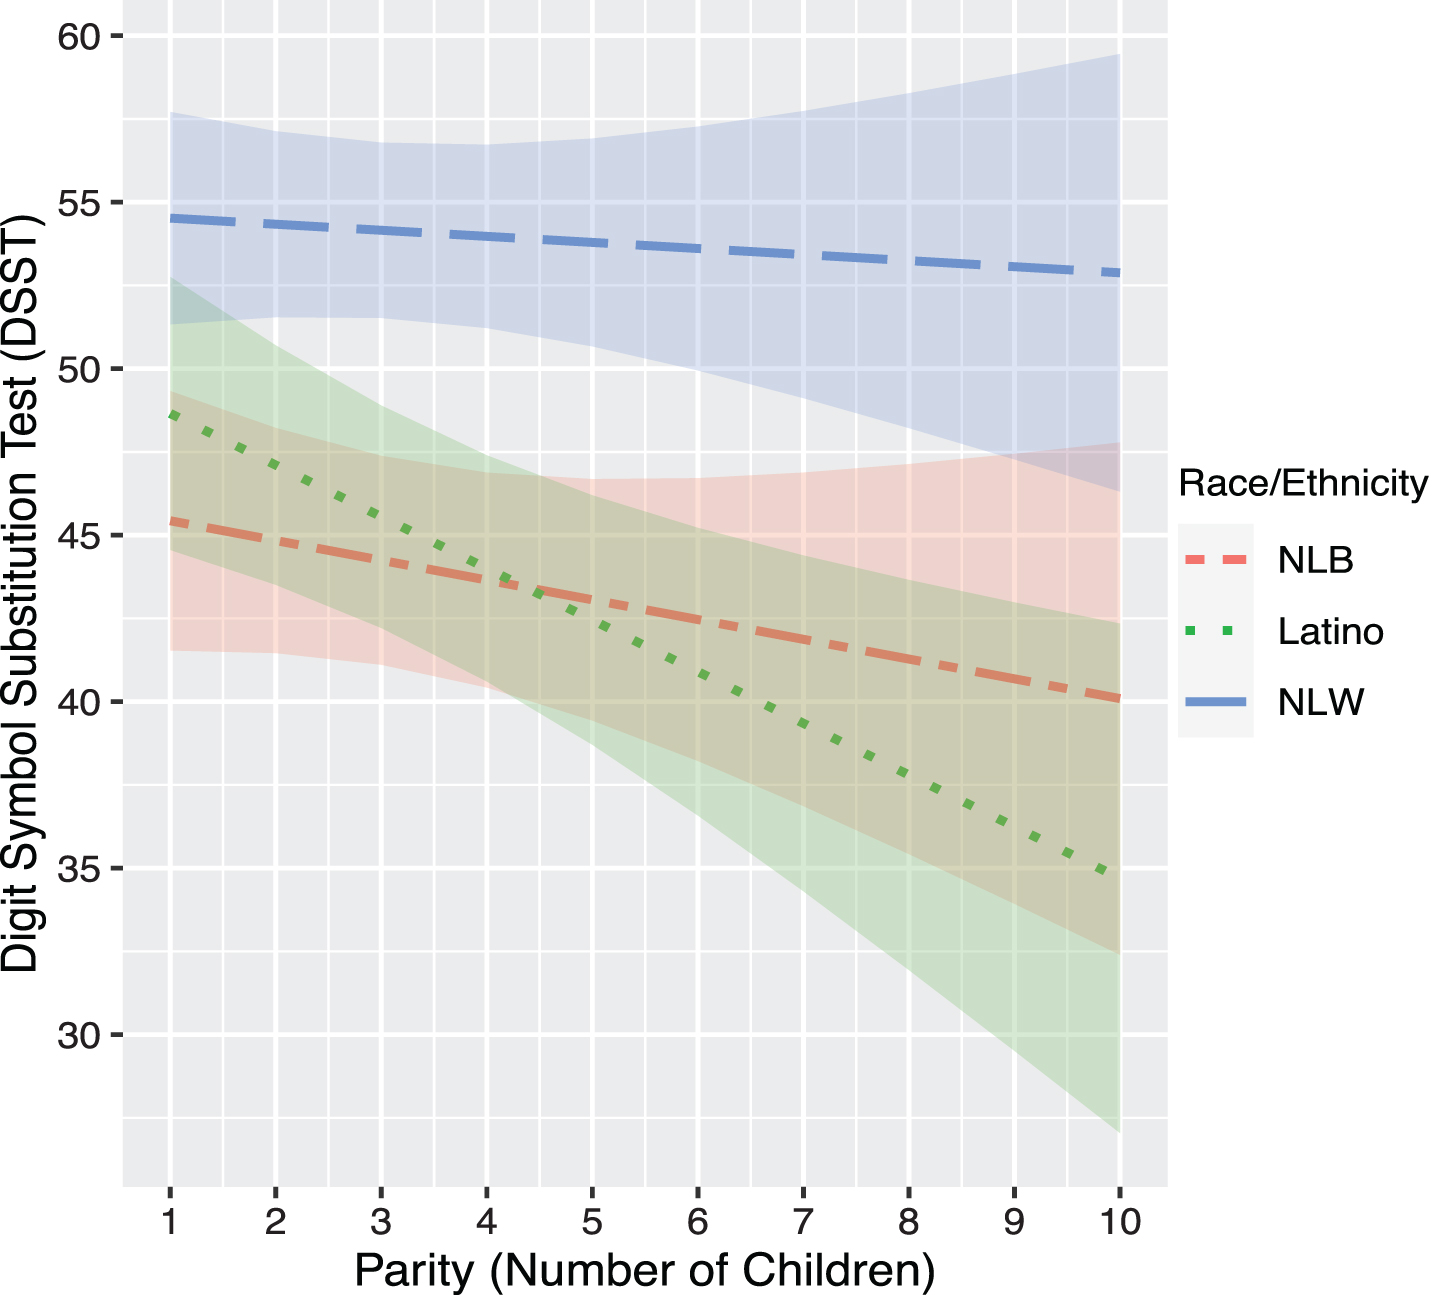 Association between Predicted DSST scores and Parity by Race/Ethnicity. NLB, Non-Latino Black; NLW, Non-Latino White. Models was adjusted for age at cognitive testing, age at first pregnancy, age at last menstrual period, BMI, cardiovascular disease (CVD) composite score, poverty income ratio (PIR), depressive symptoms (PHQ), education, history of oral contraceptive use, hypertension history, diabetes history.